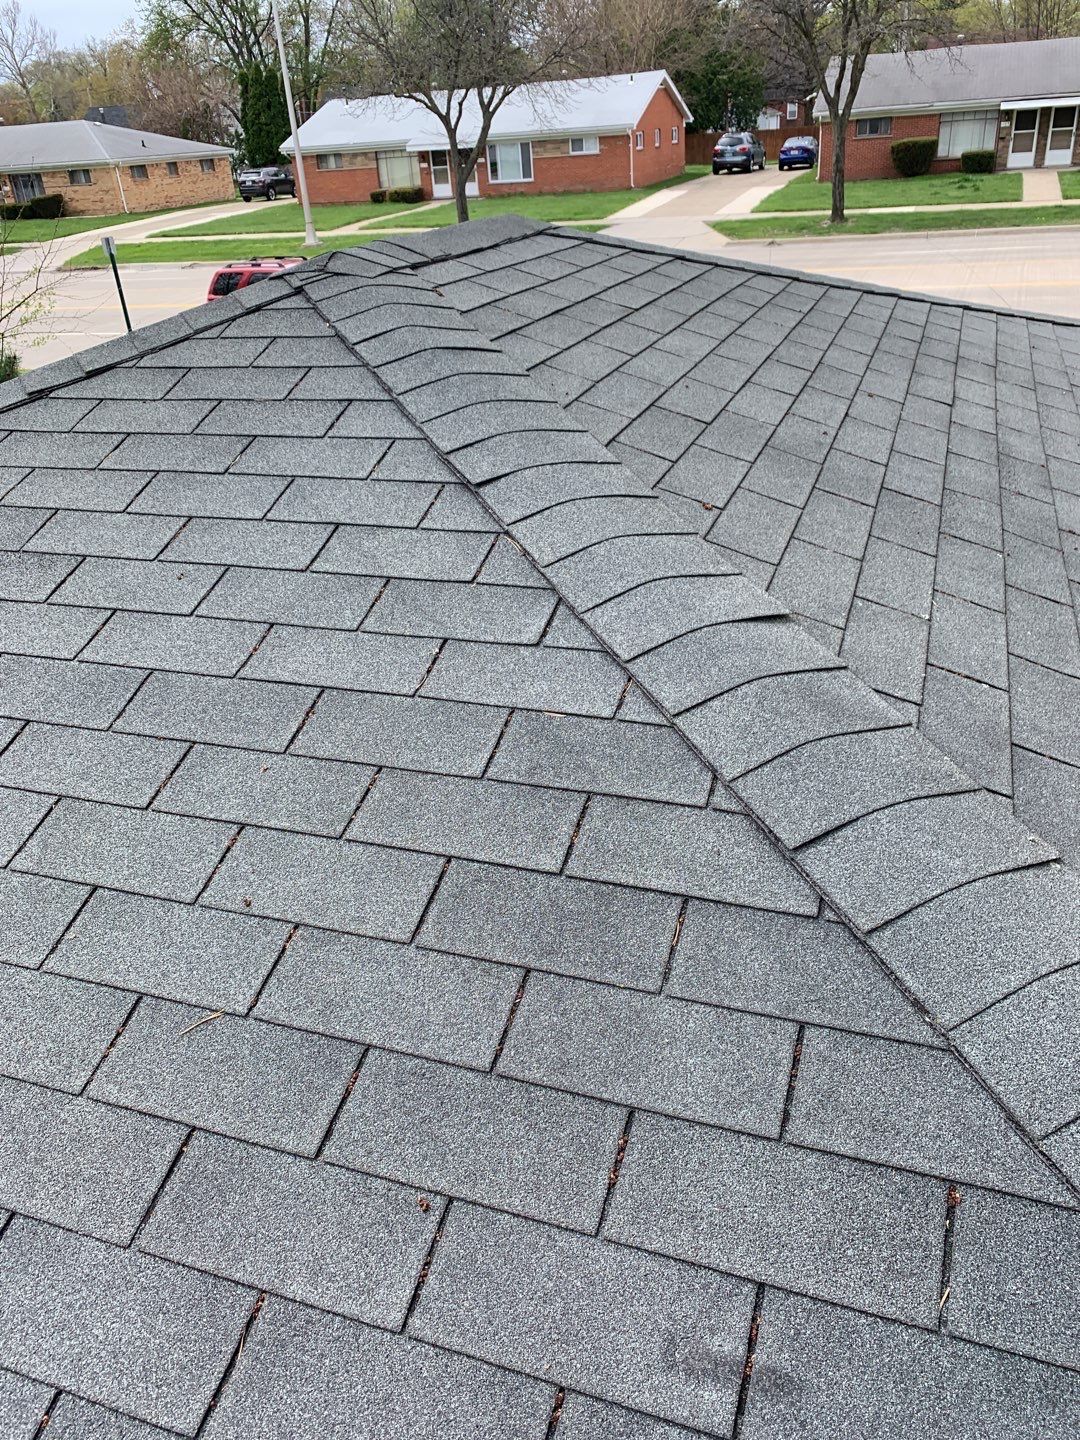 Madison Heights Roofers